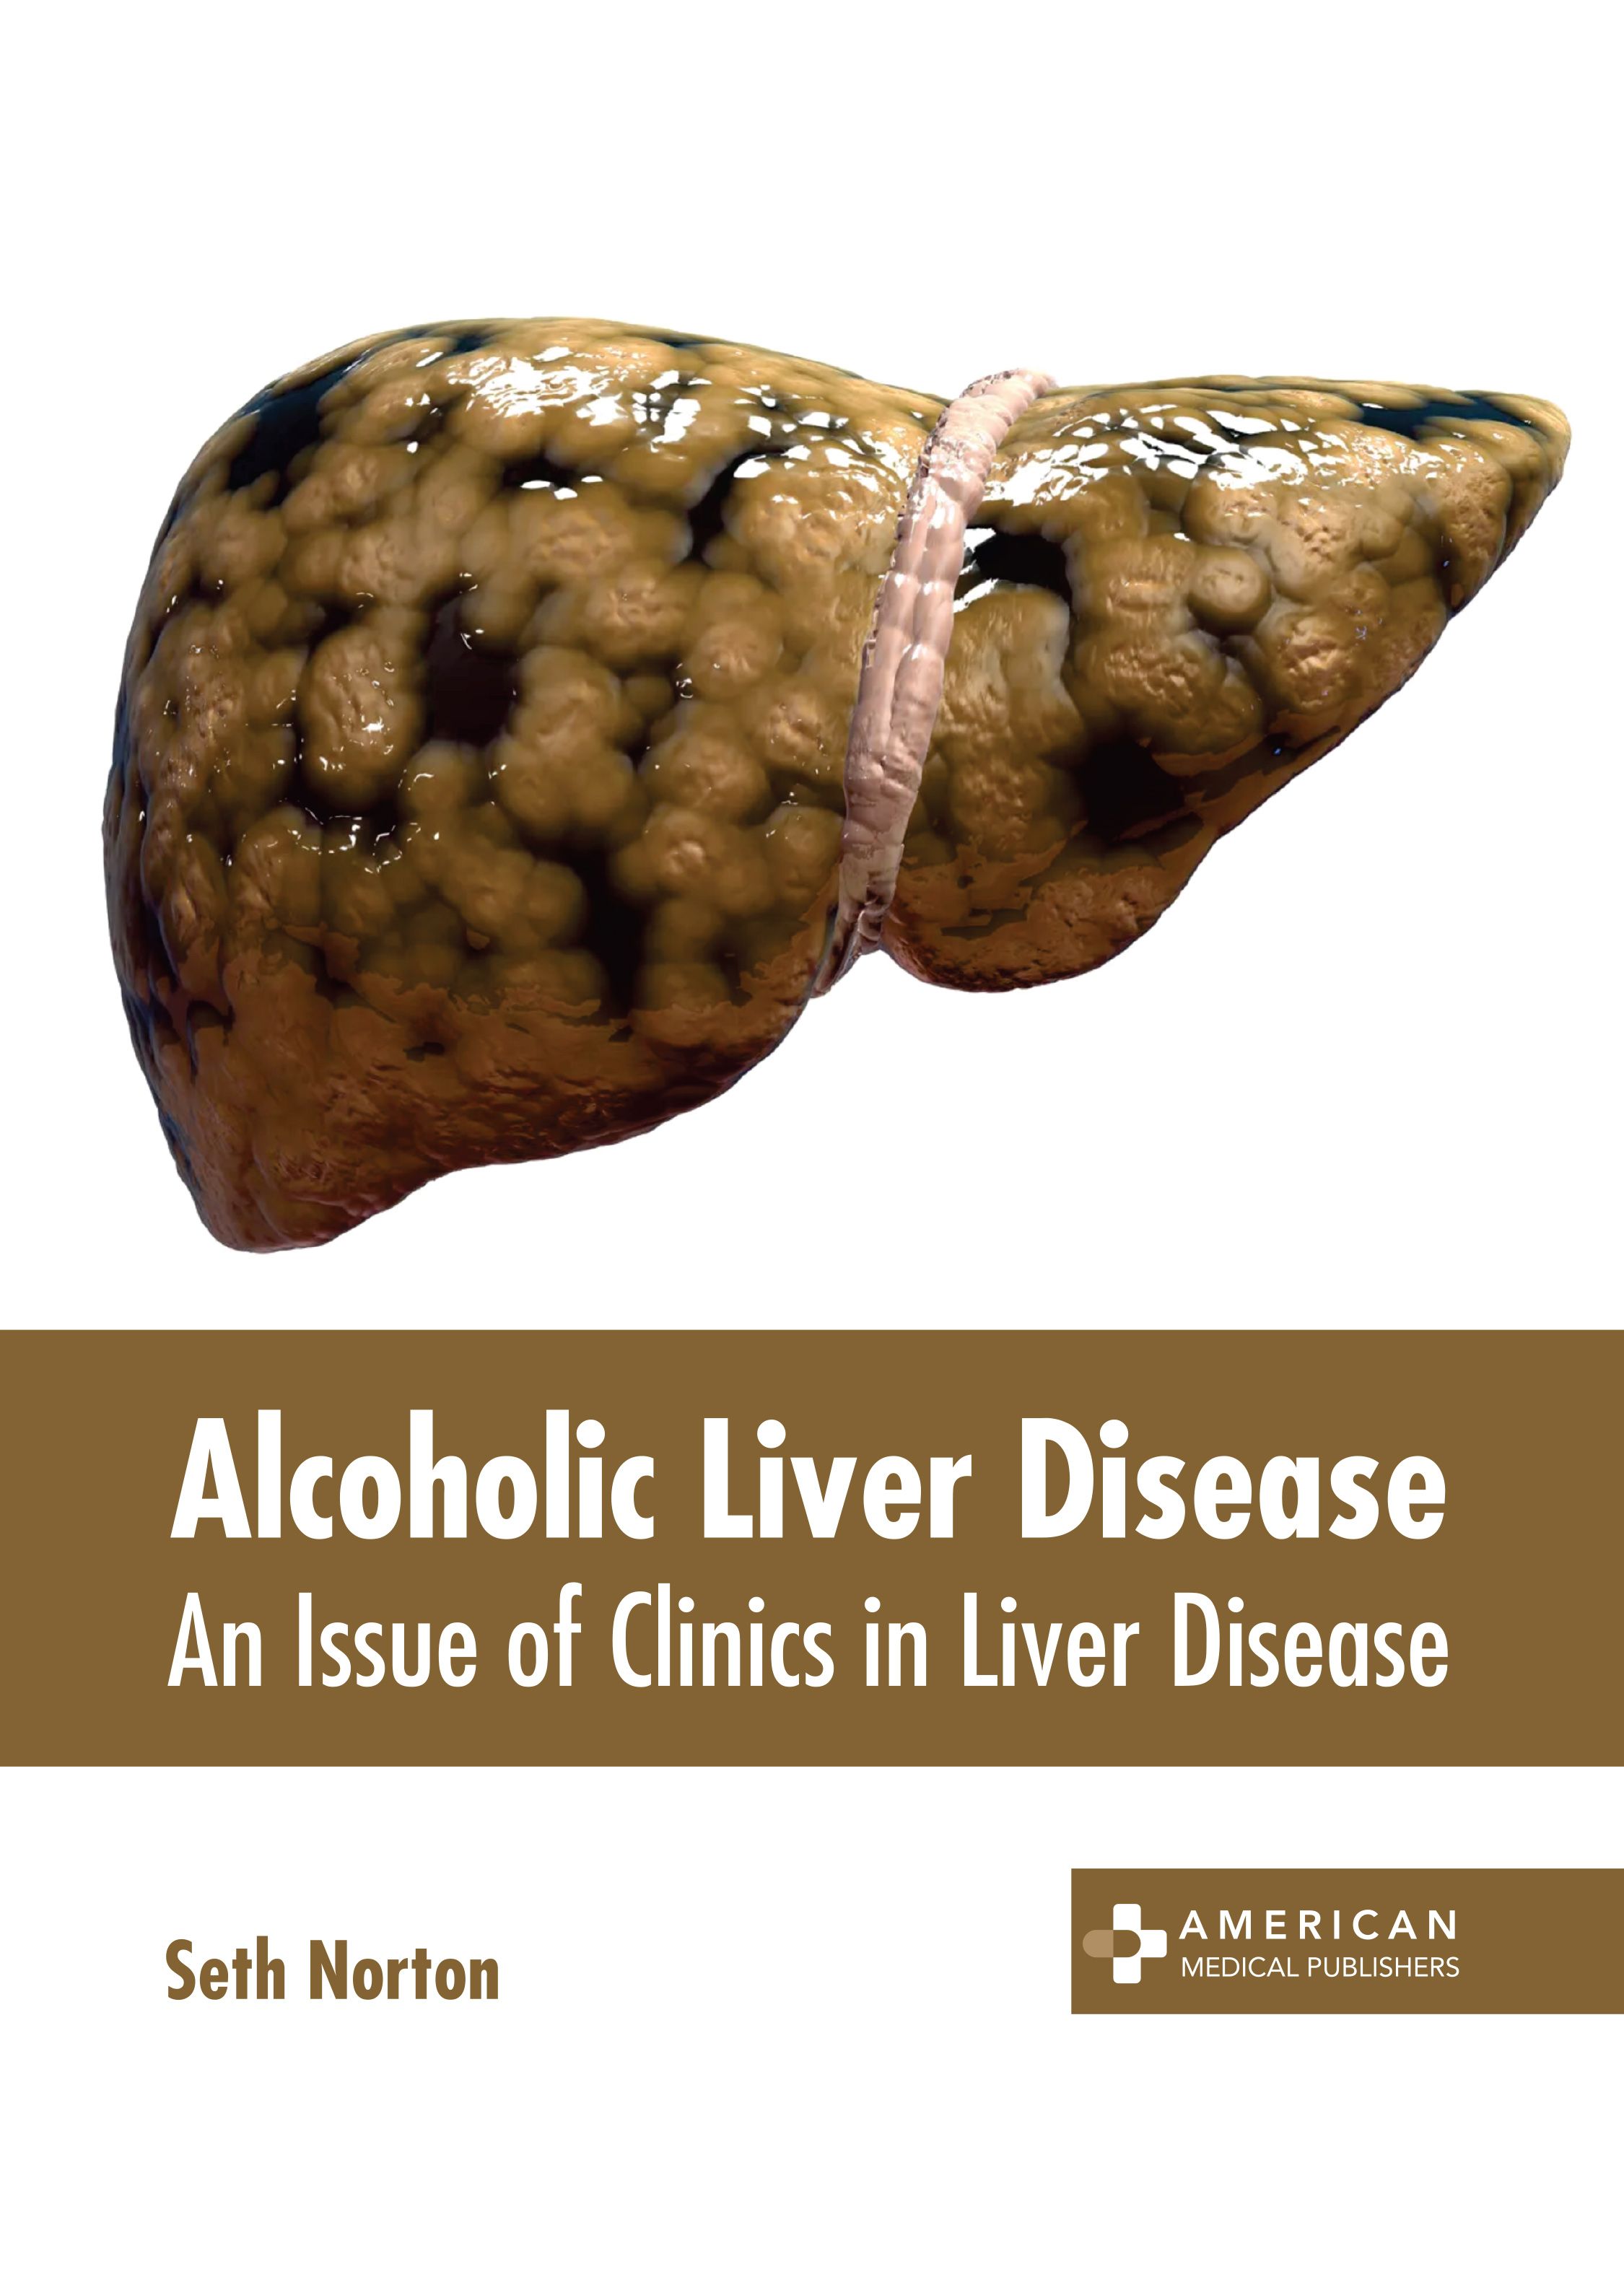 ALCOHOLIC LIVER DISEASE: AN ISSUE OF CLINICS IN LIVER DISEASE